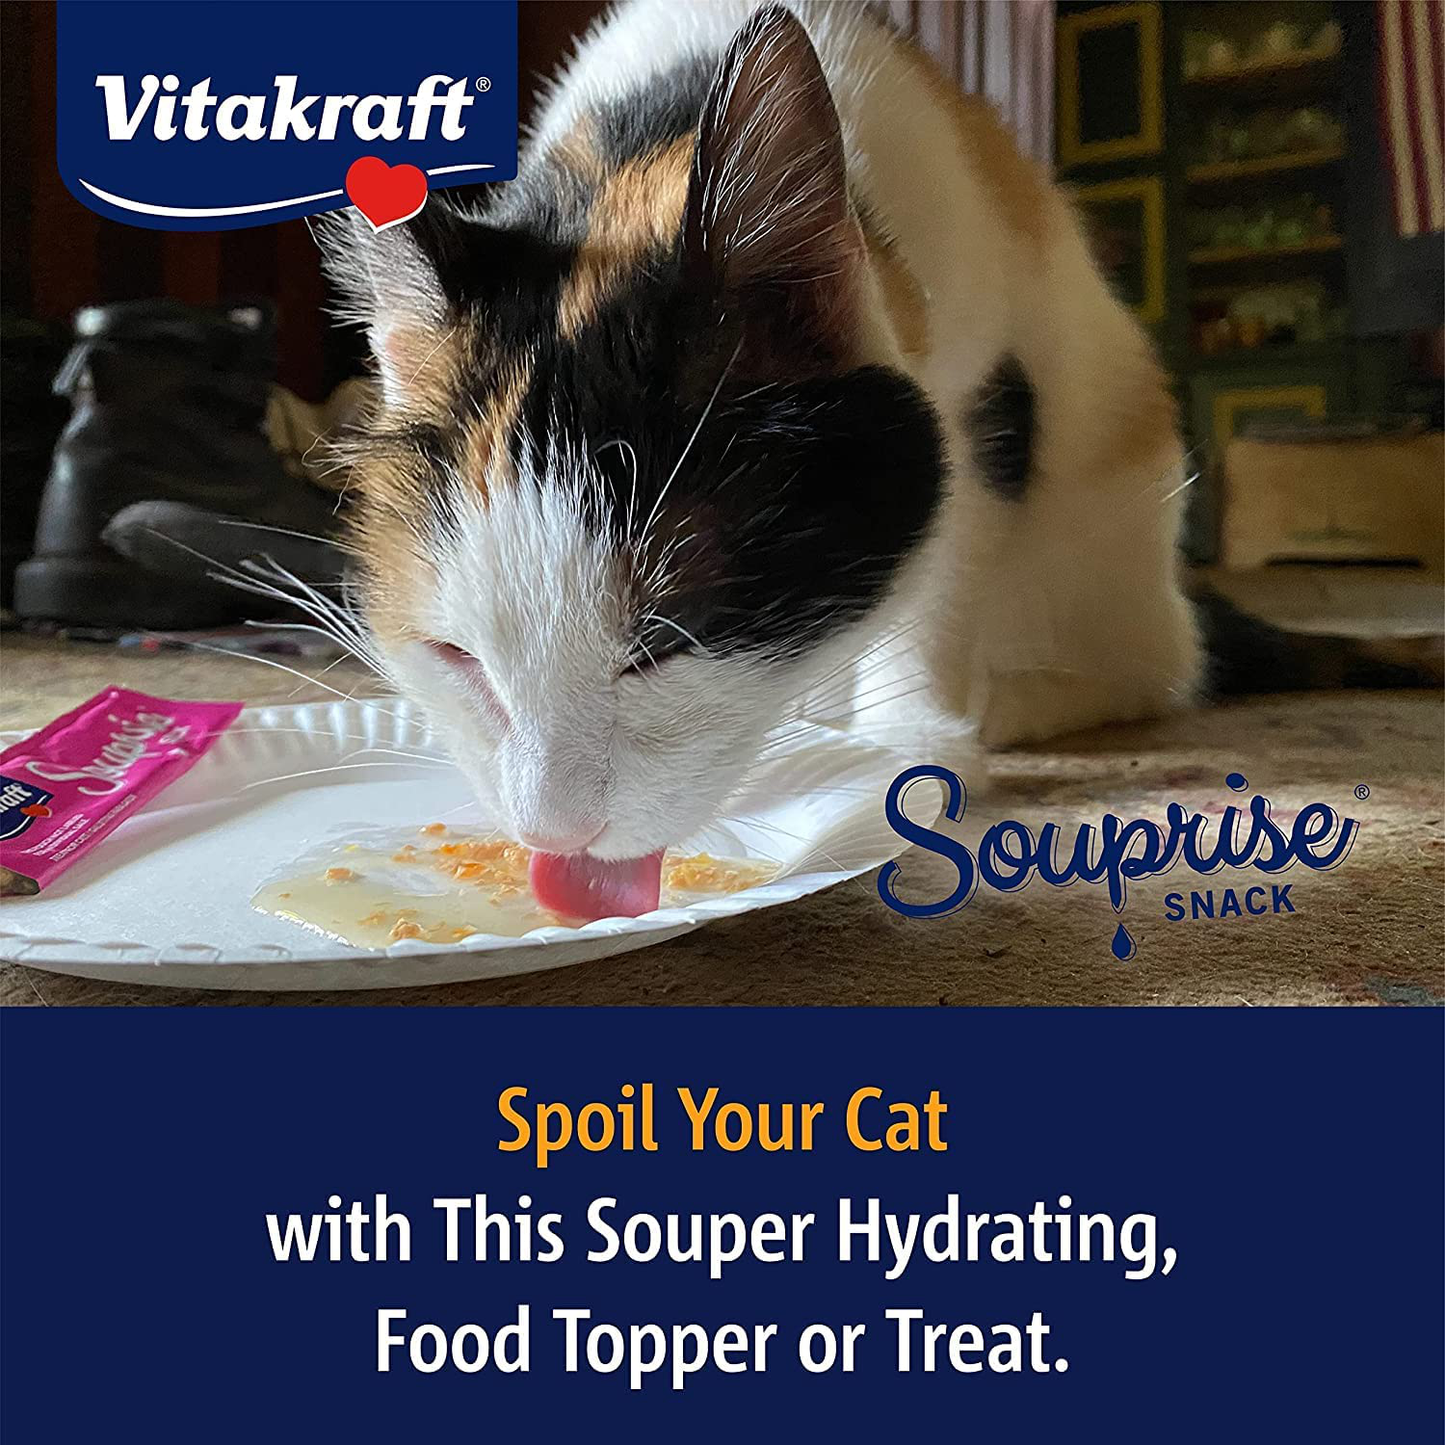 Vitakraft Souprise Snack Broth Treats for Cats, Food Topper or between Meal Snack, Adds Liquid to Your Cat'S Diet